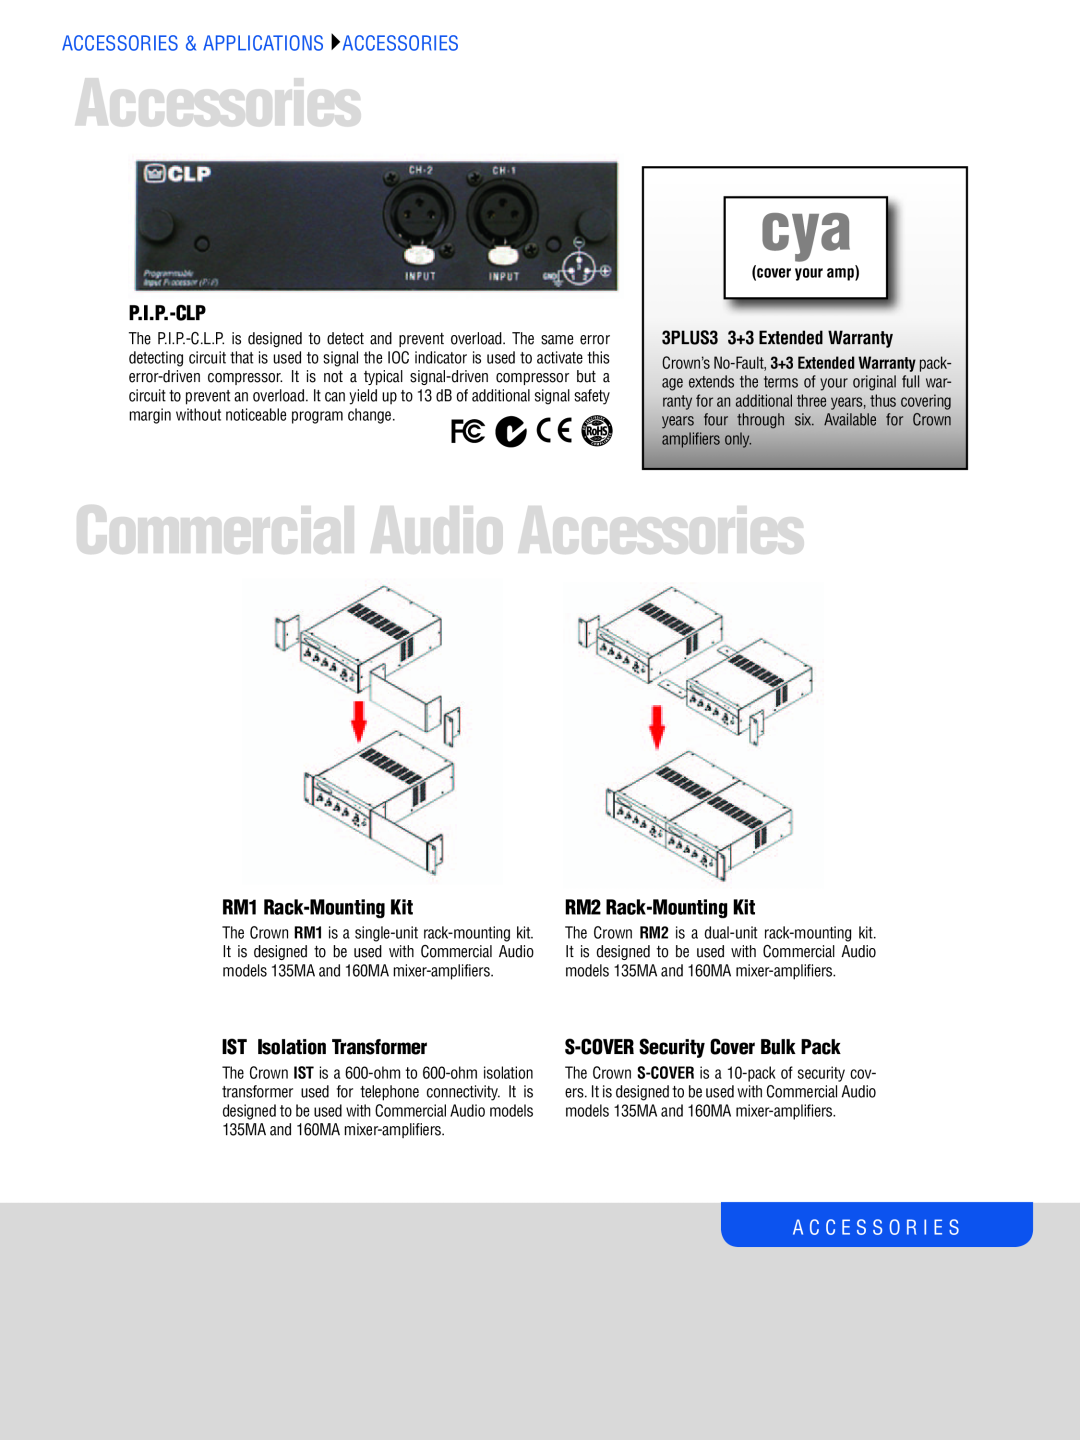 Crown CTS 2000, CTS 3000 Commercial Audio Accessories, A C C E S S O R I E S, Accessories & Applications Accessories 